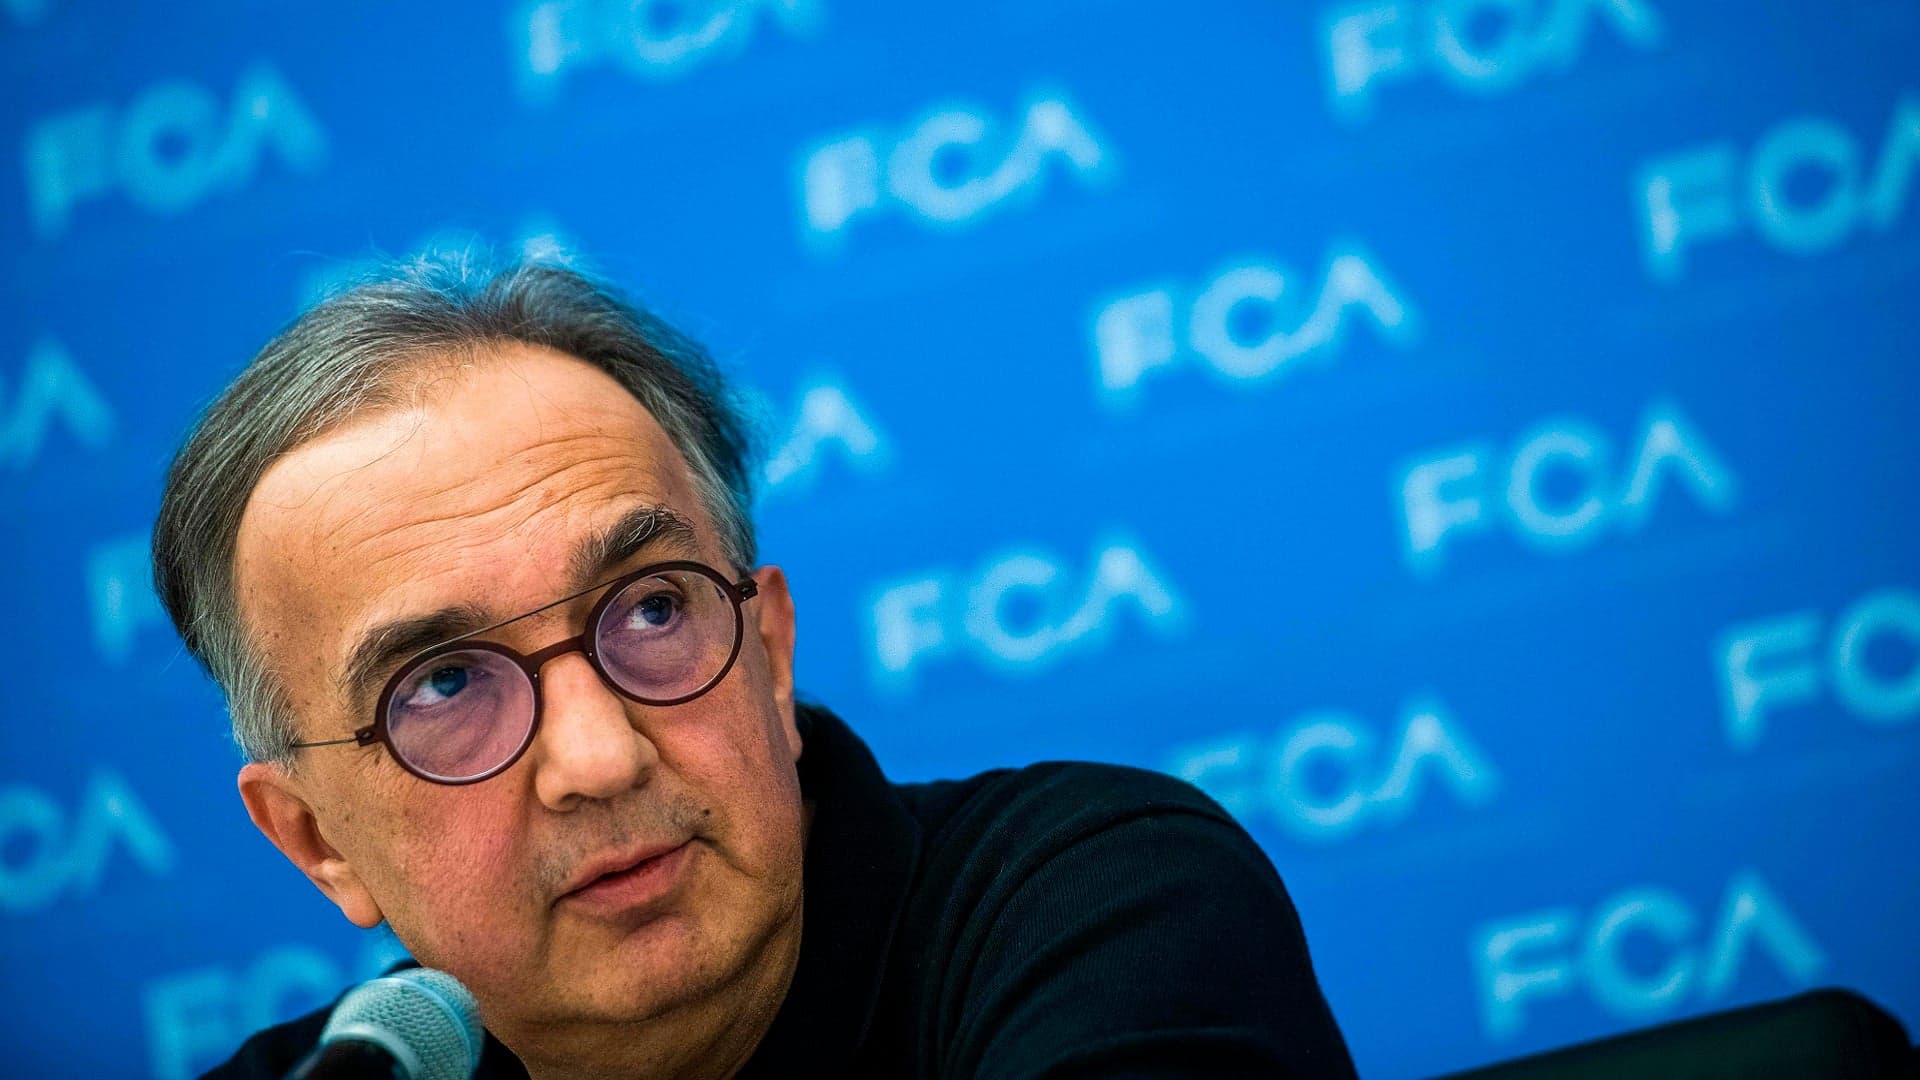 Report: Marchionne’s Condition ‘Irreversible’ After Post-Surgery Complications